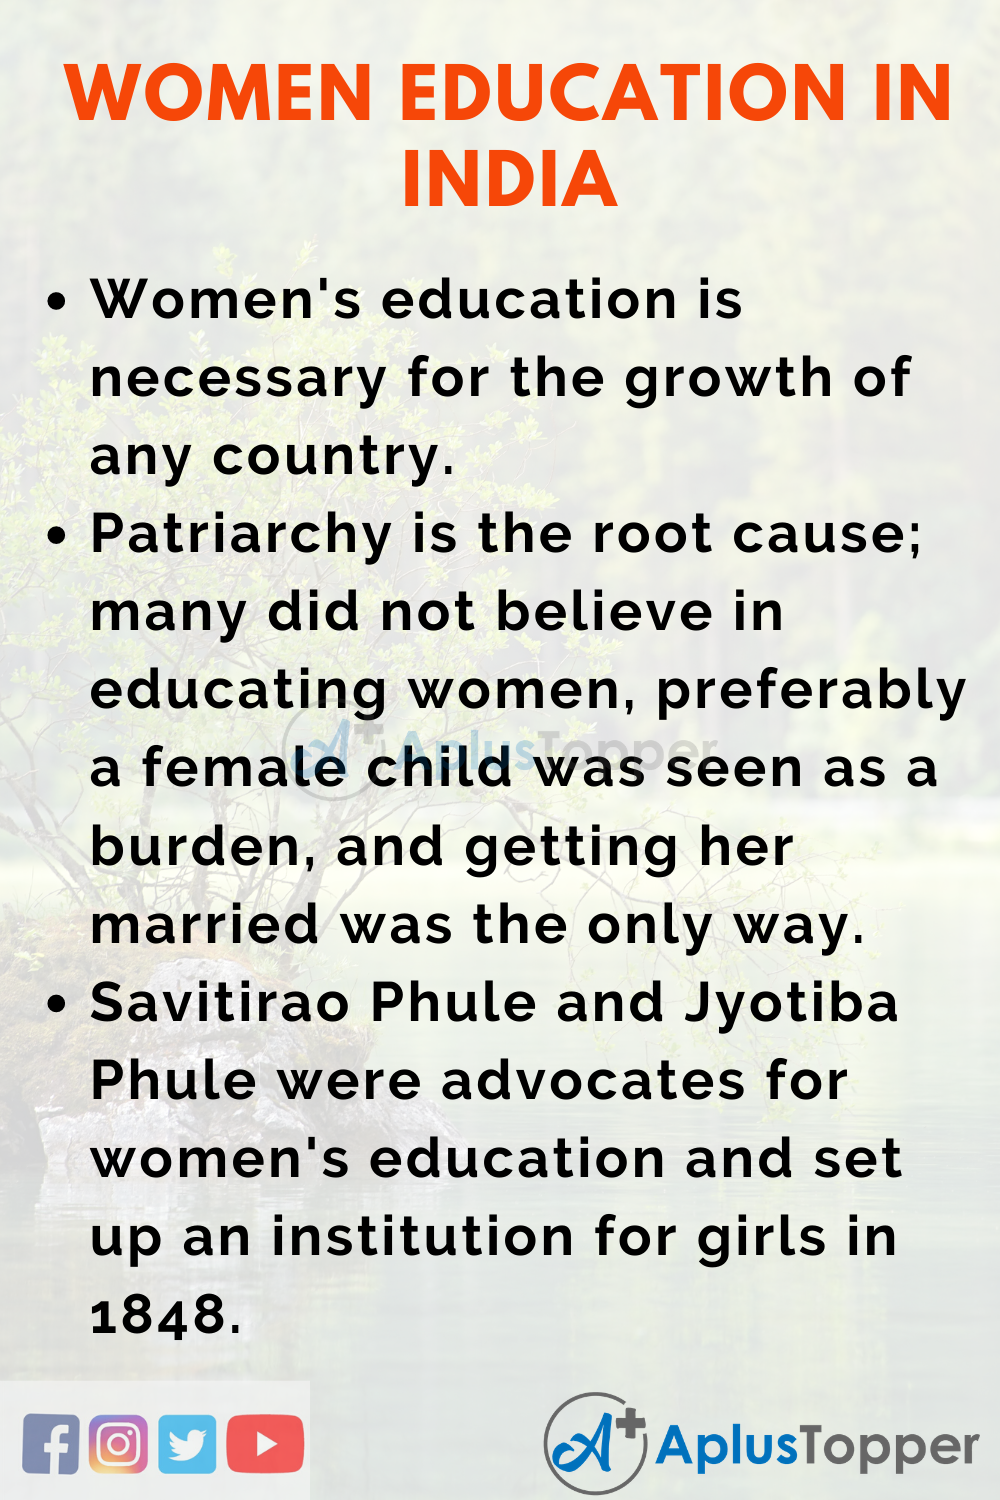 write an essay about importance of women's education